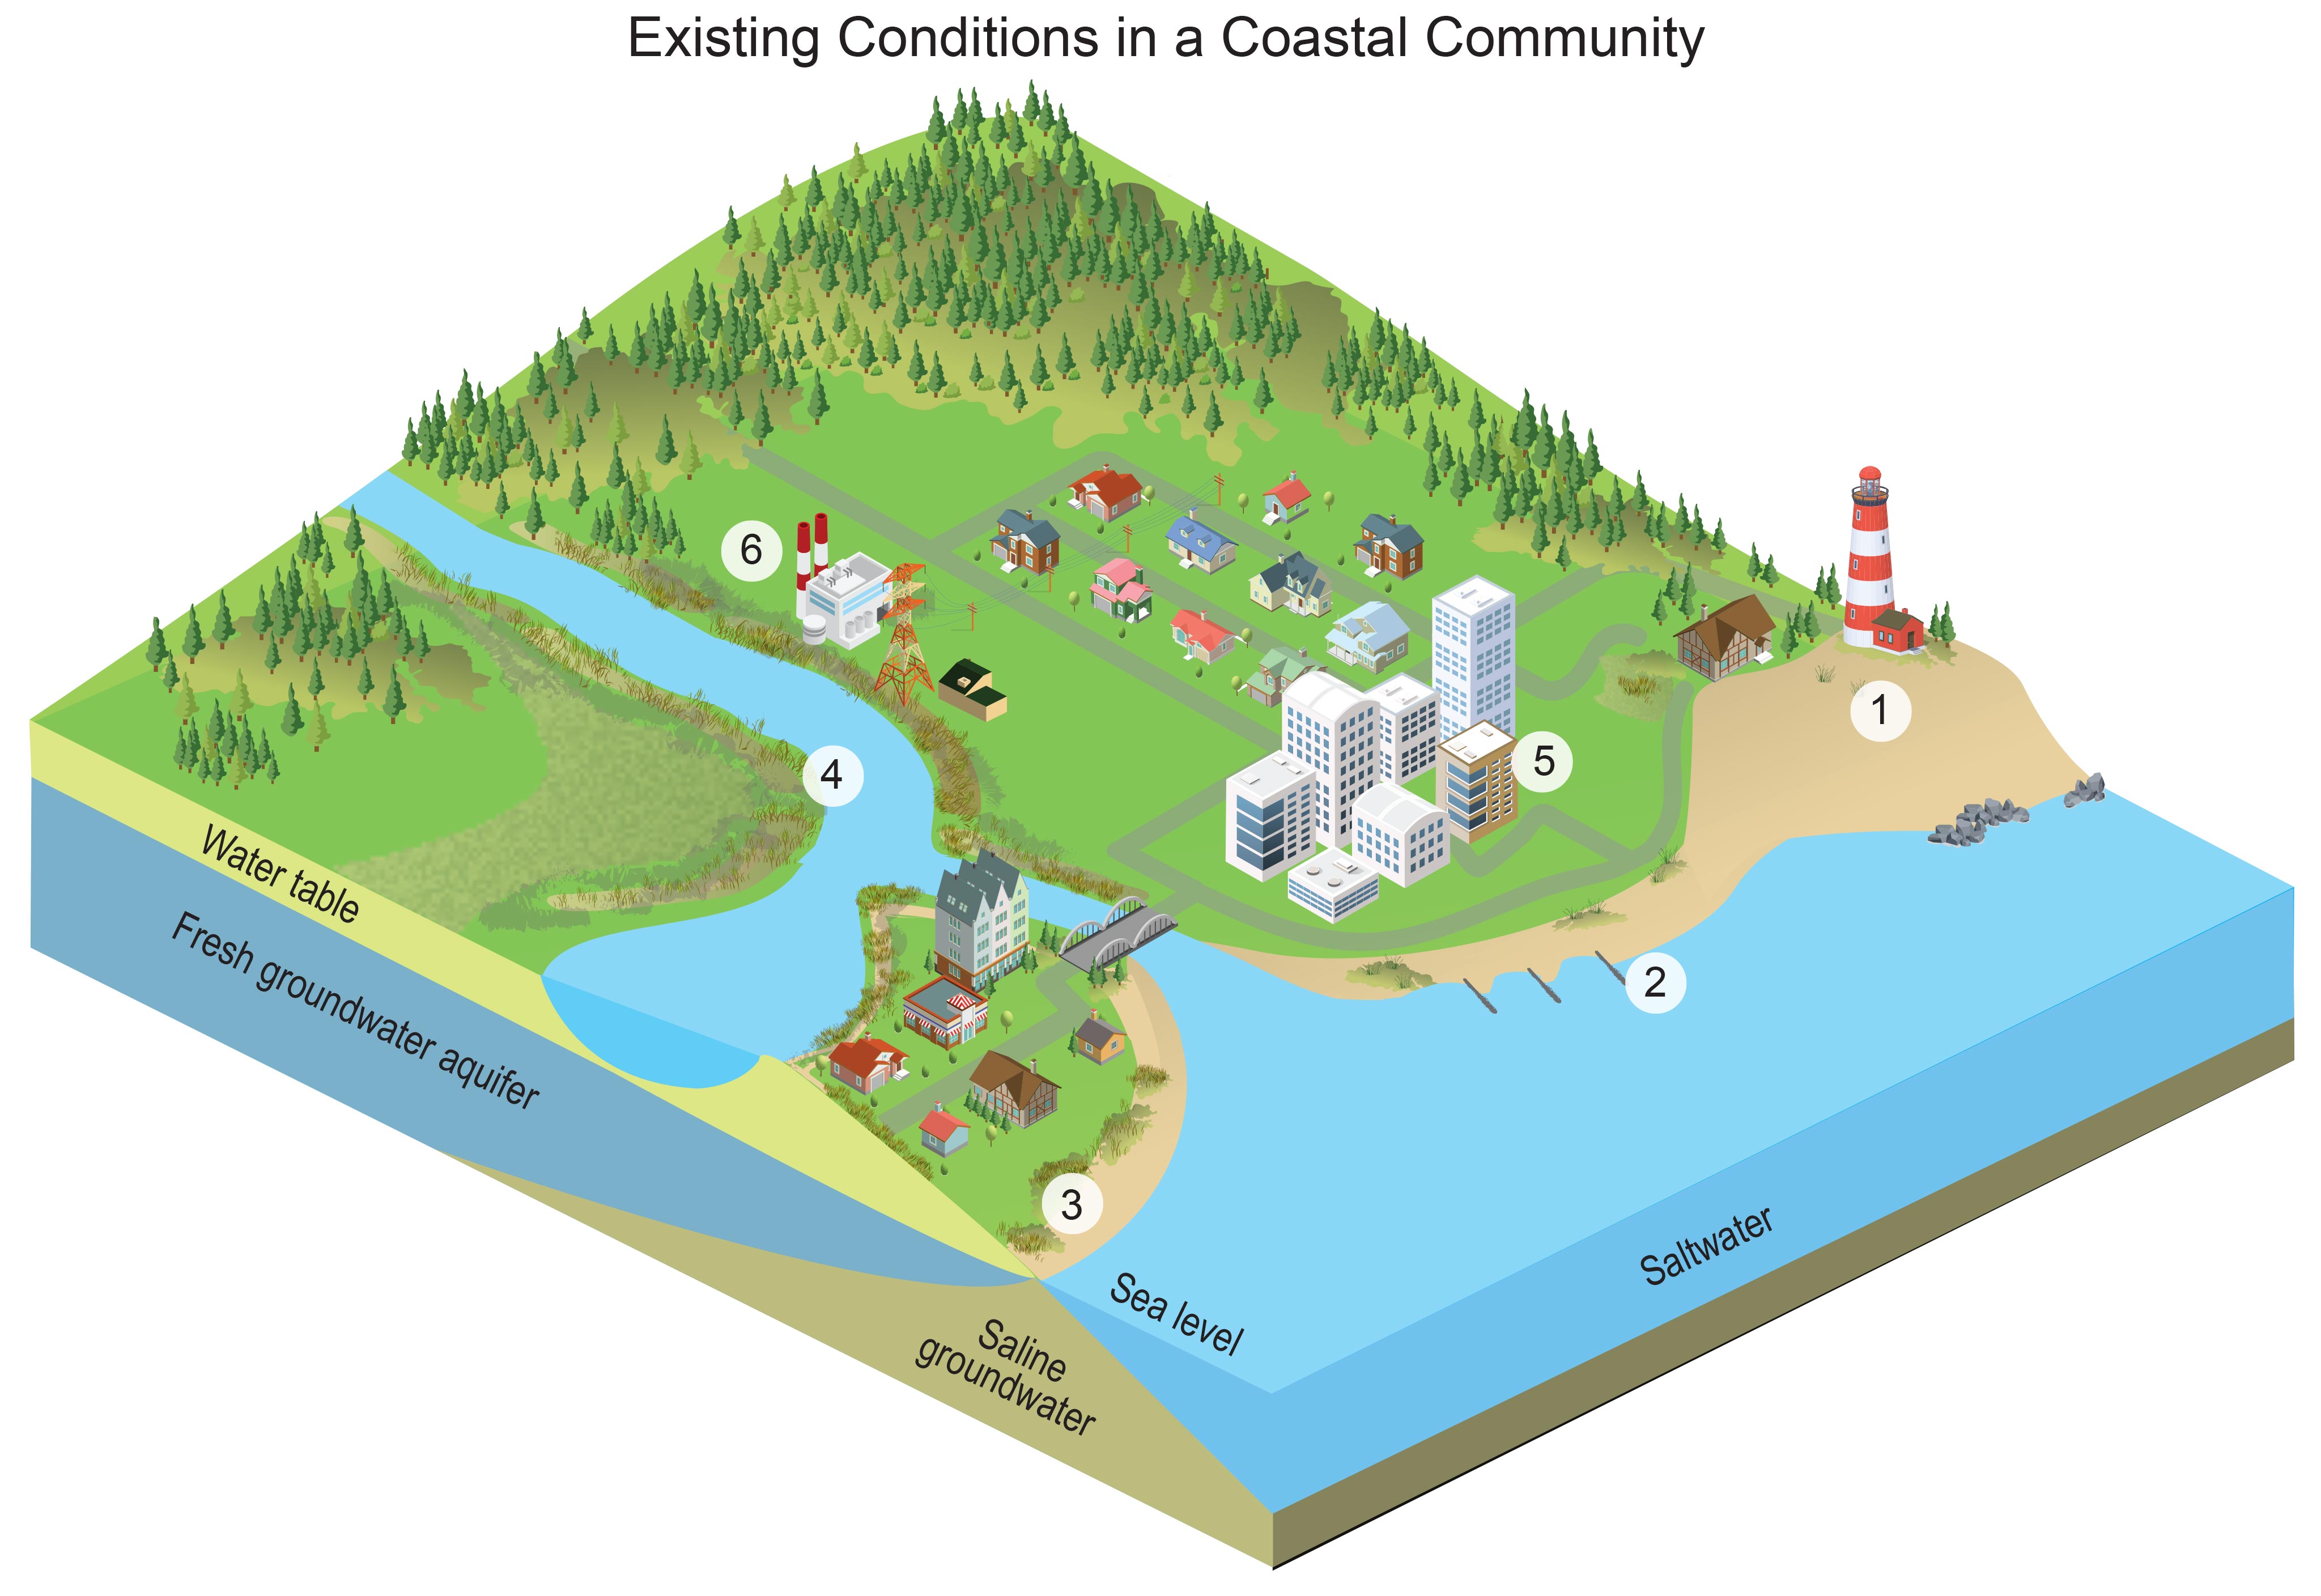 Existing Conditions in a Coastal Community